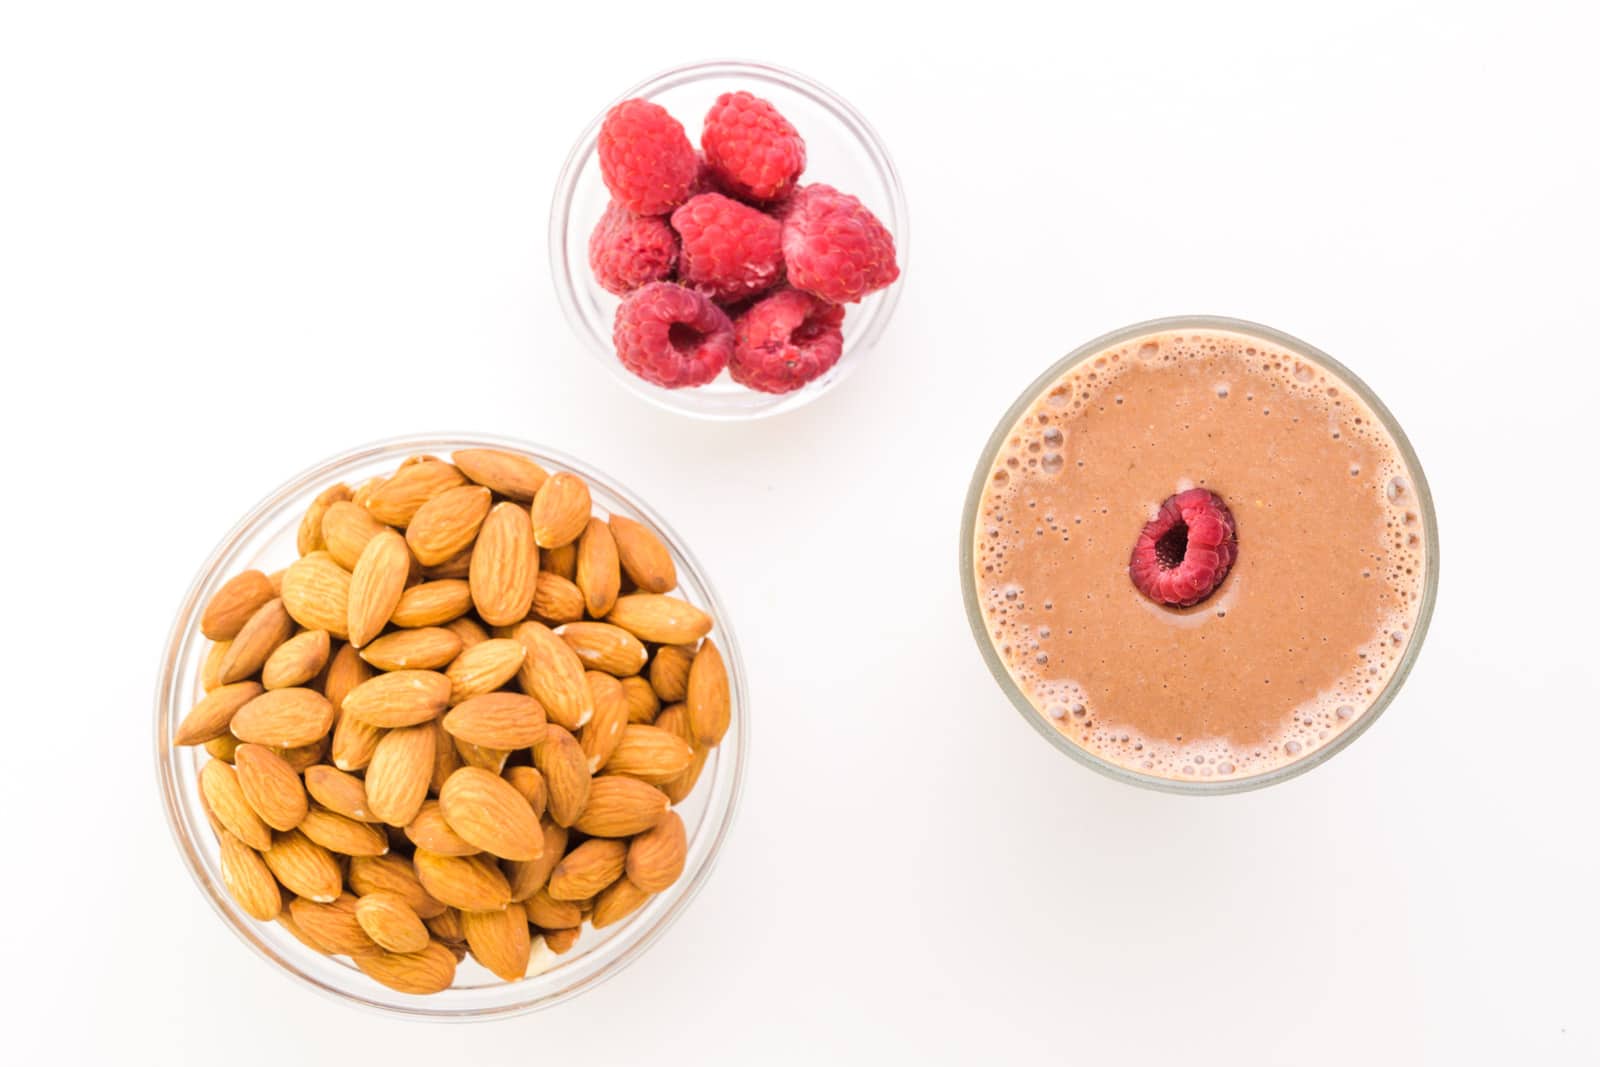 Looking down on a chocolate smoothie with a raspberry on top. There is a bowl of raspberries and a bowl of almonds next to it.